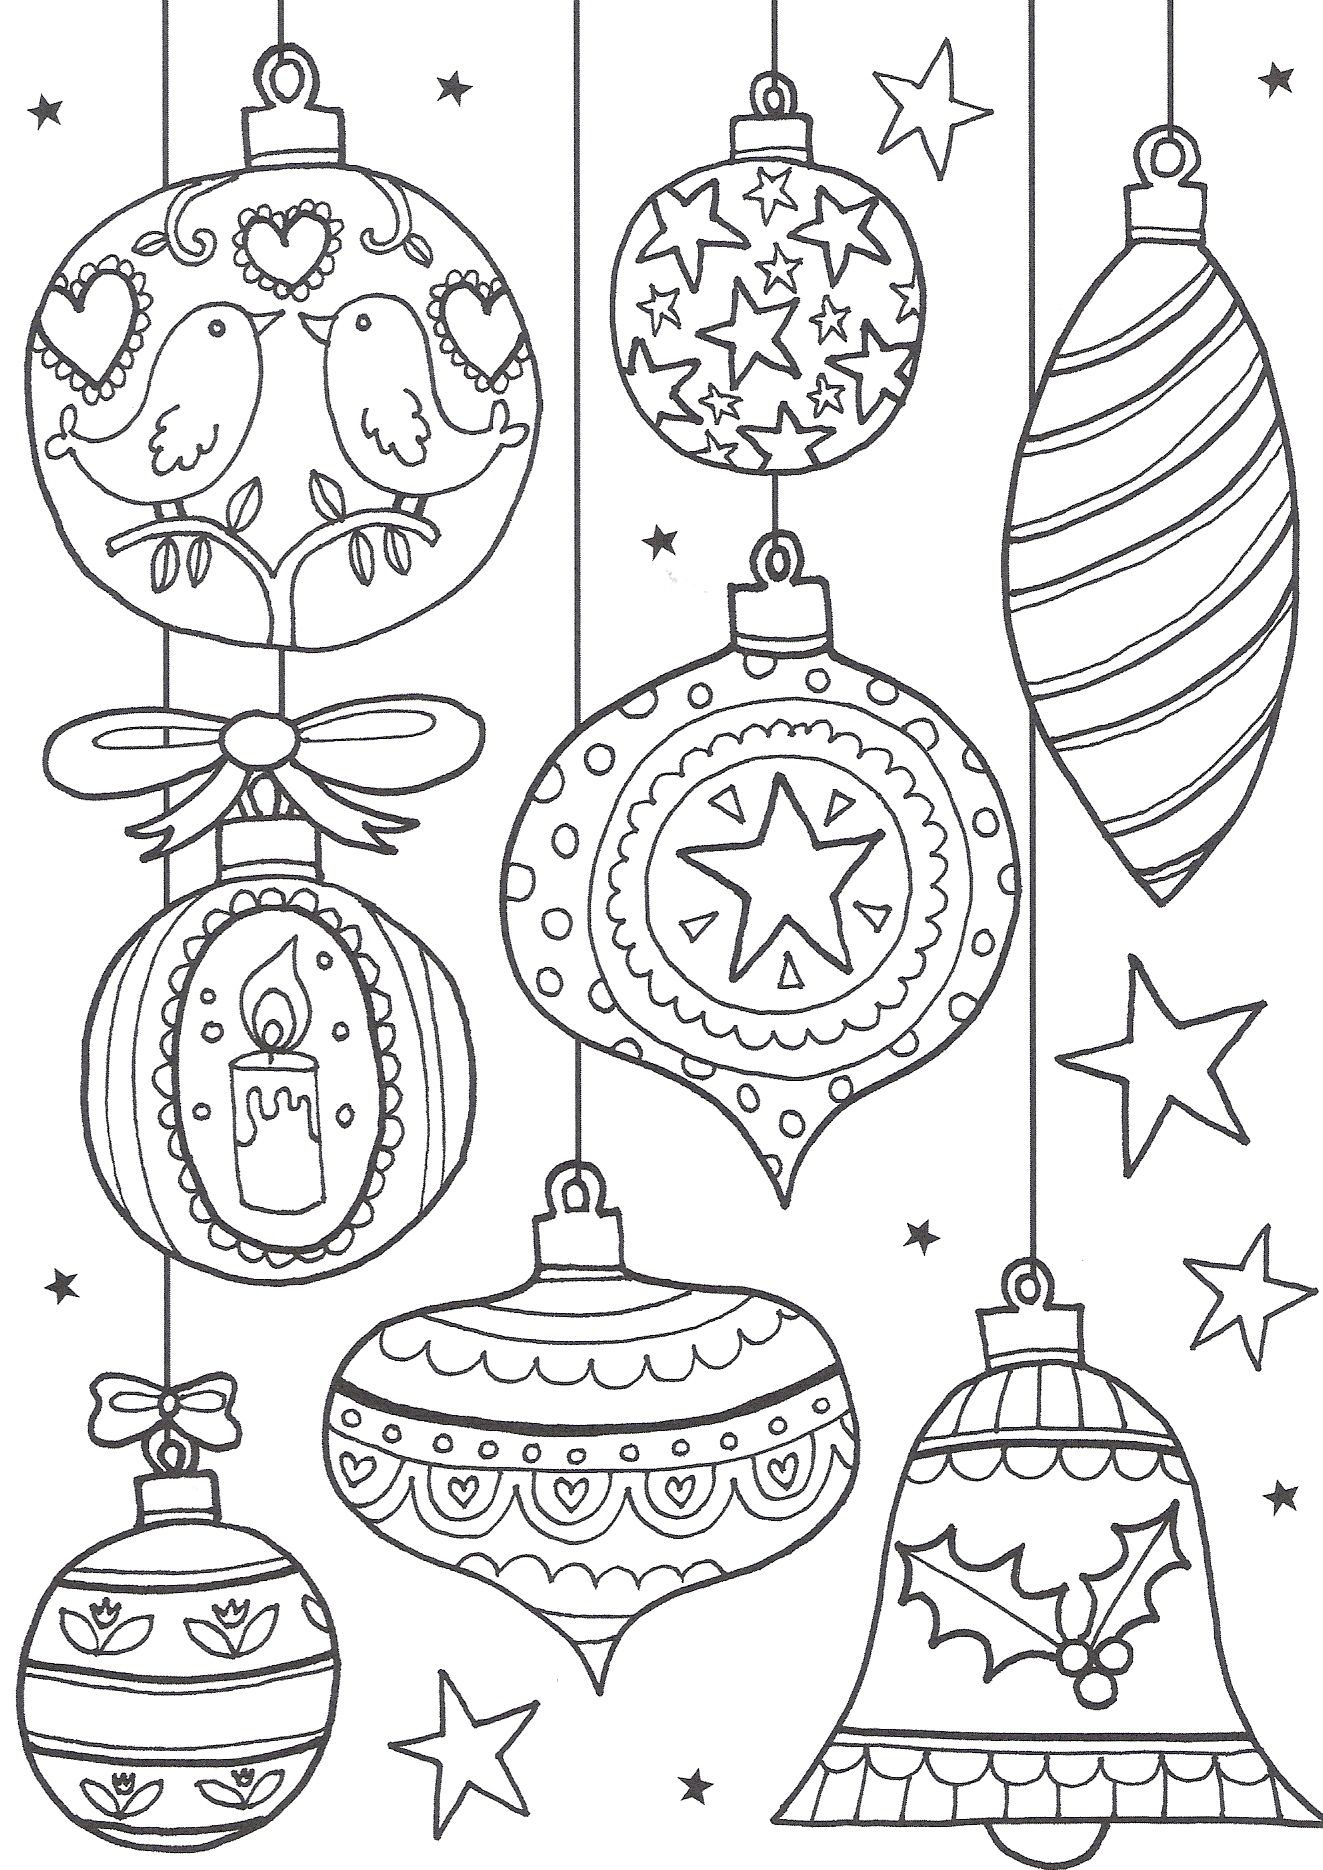 Free Christmas Colouring Pages For Adults – The Ultimate Roundup - Free Printable Coloring Cards For Adults